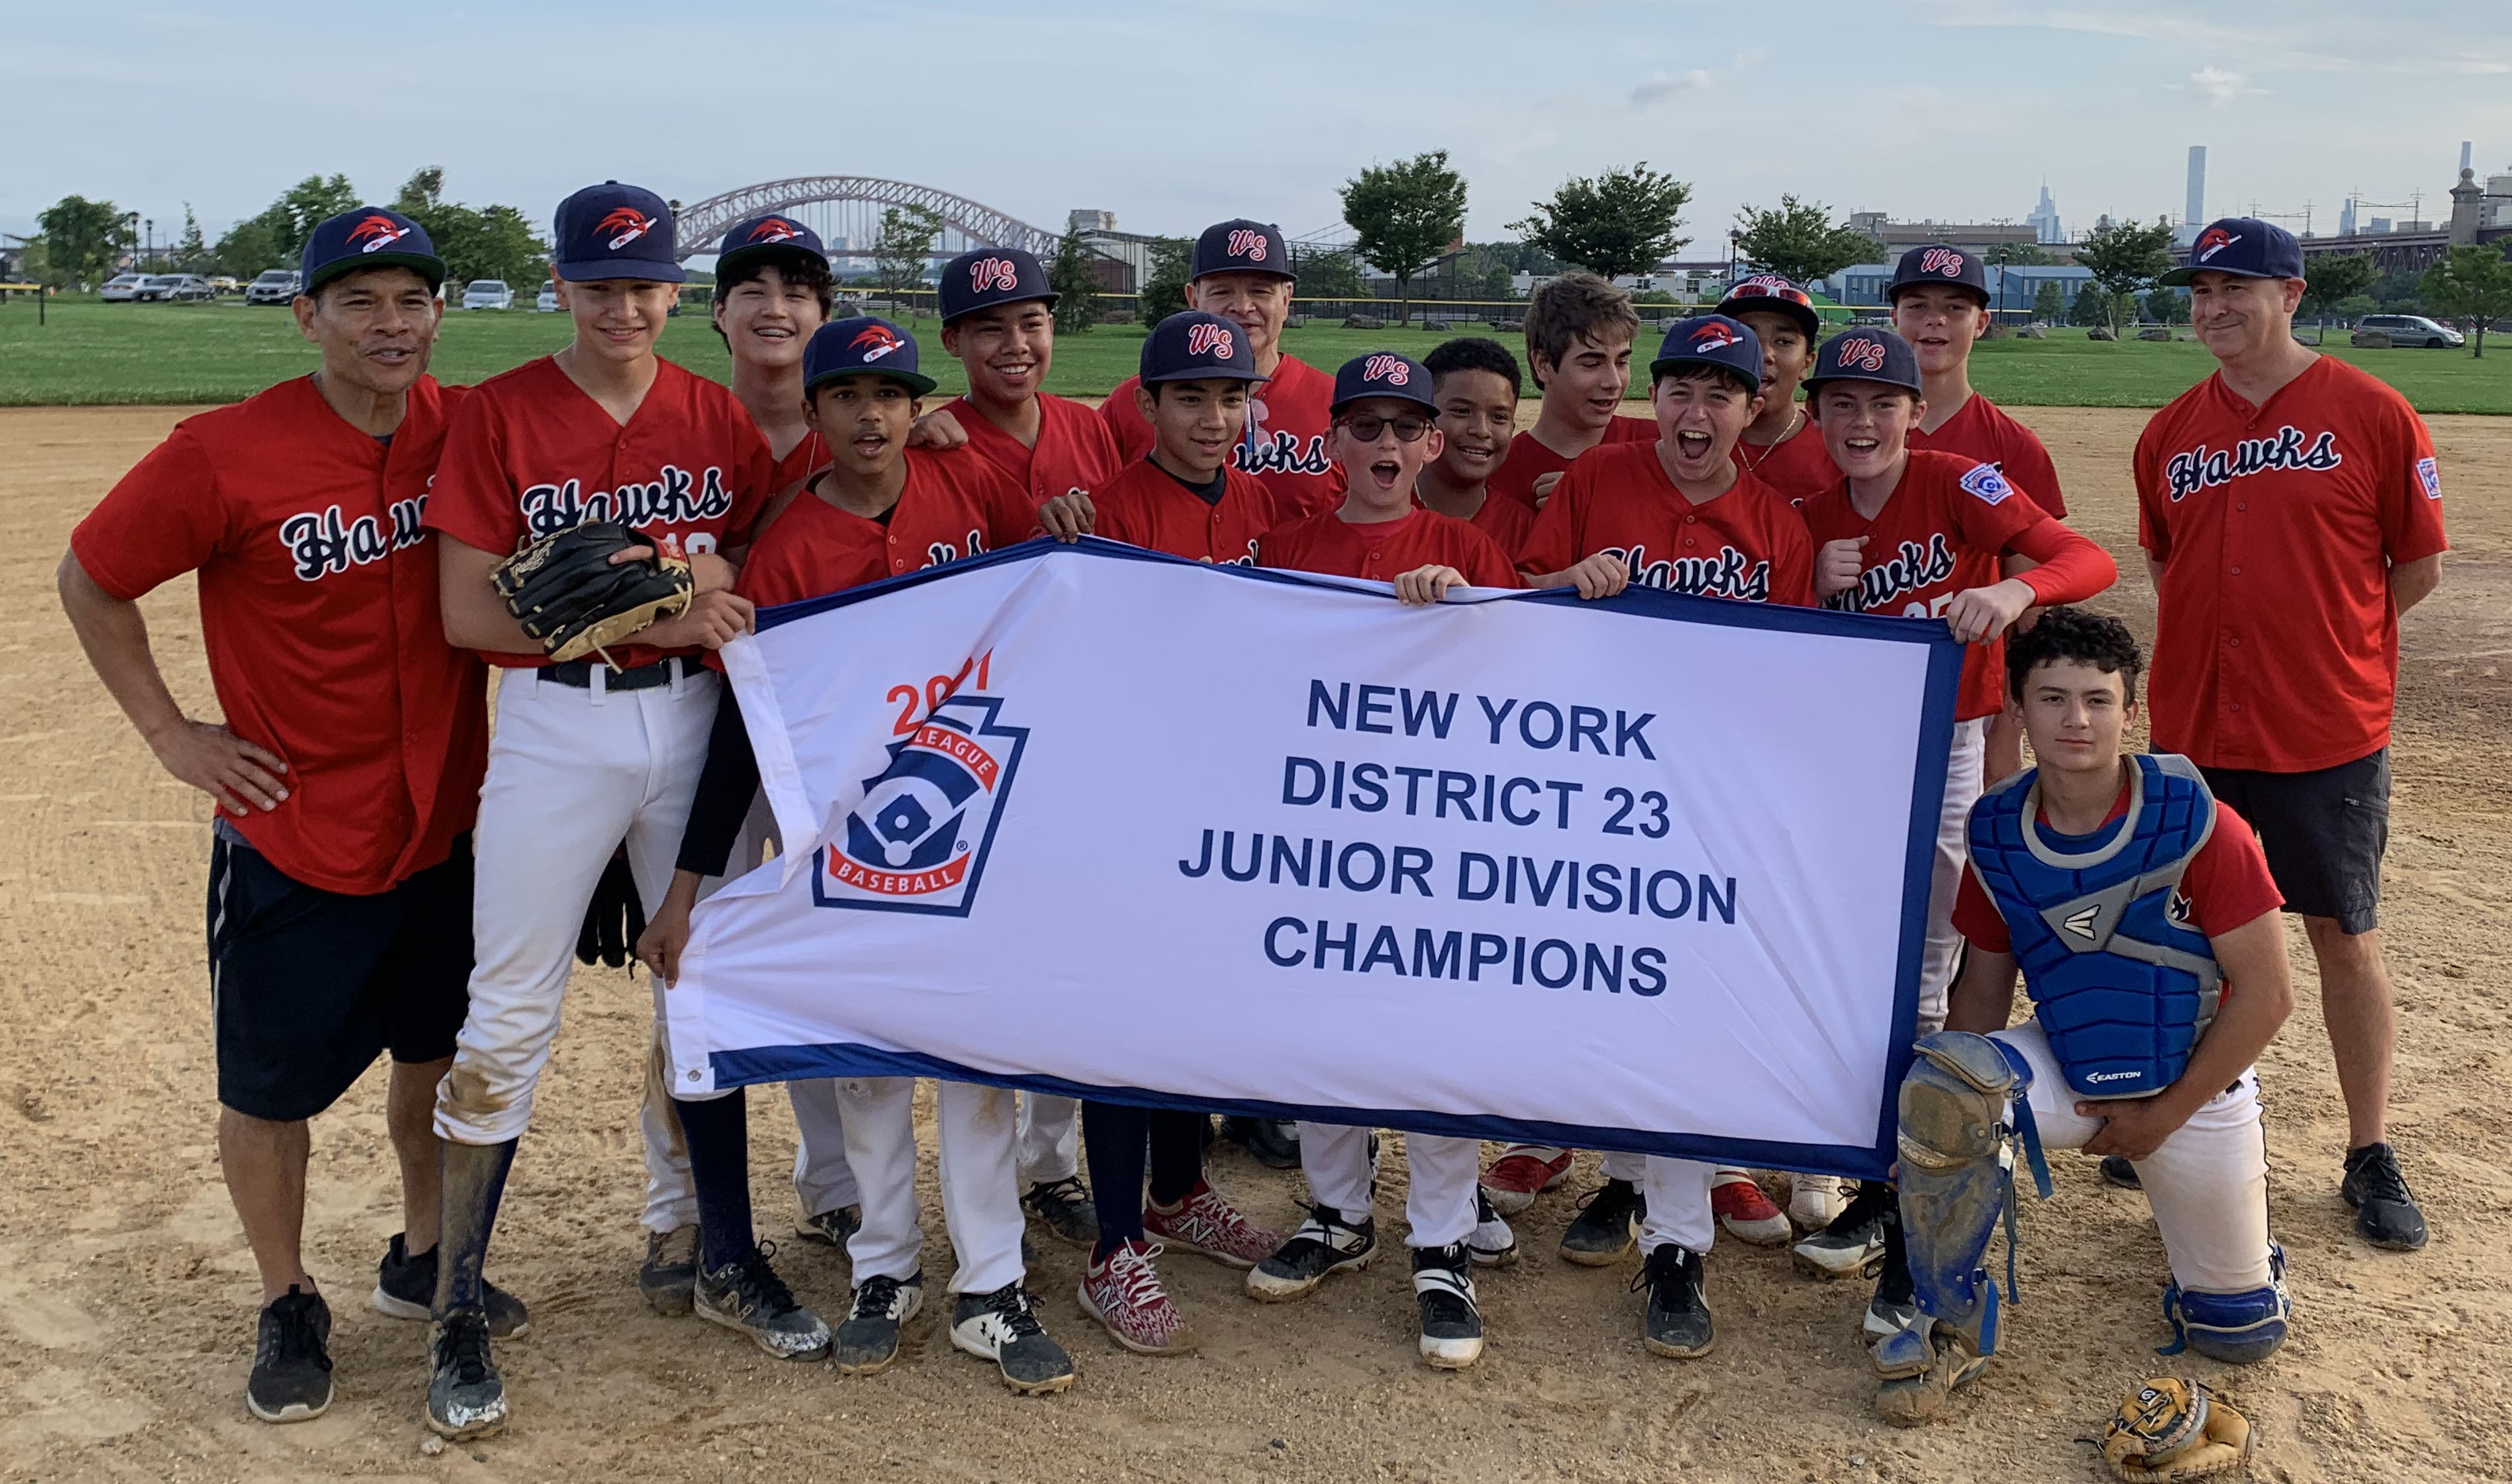 The WSLL Juniors Hawks team are the 2021 Little League District 23 CHAMPIONS!